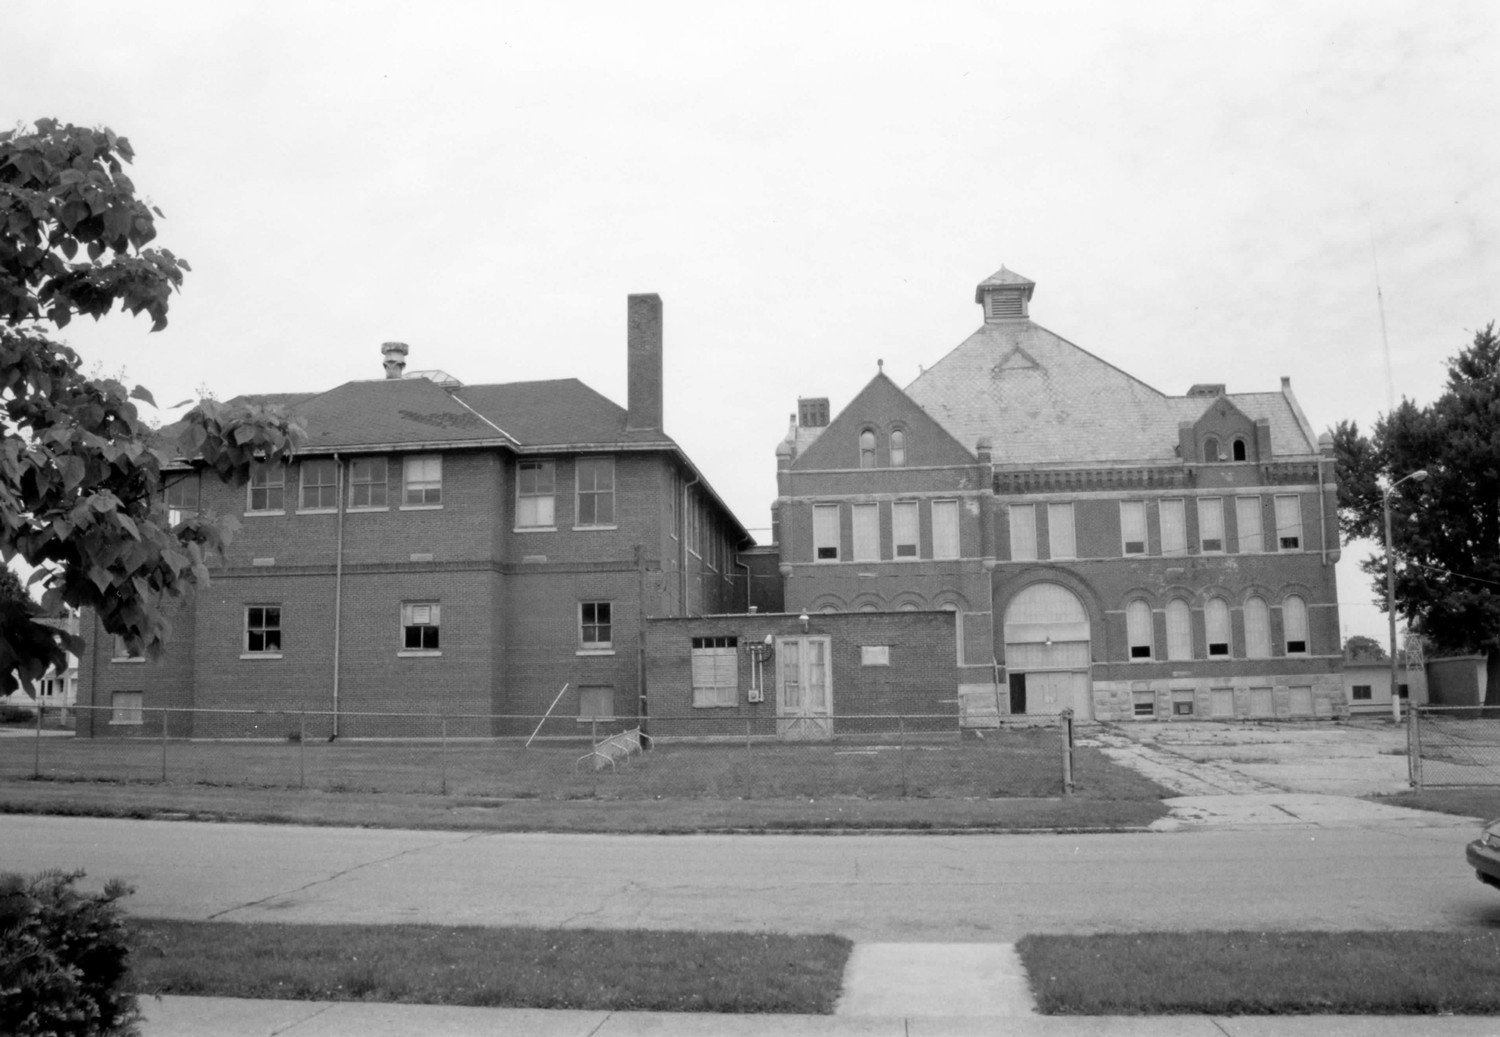 Gas City High School - East Ward School, Gas City Indiana 1923 addition and 1894 building, south elevation, looking north (2003)